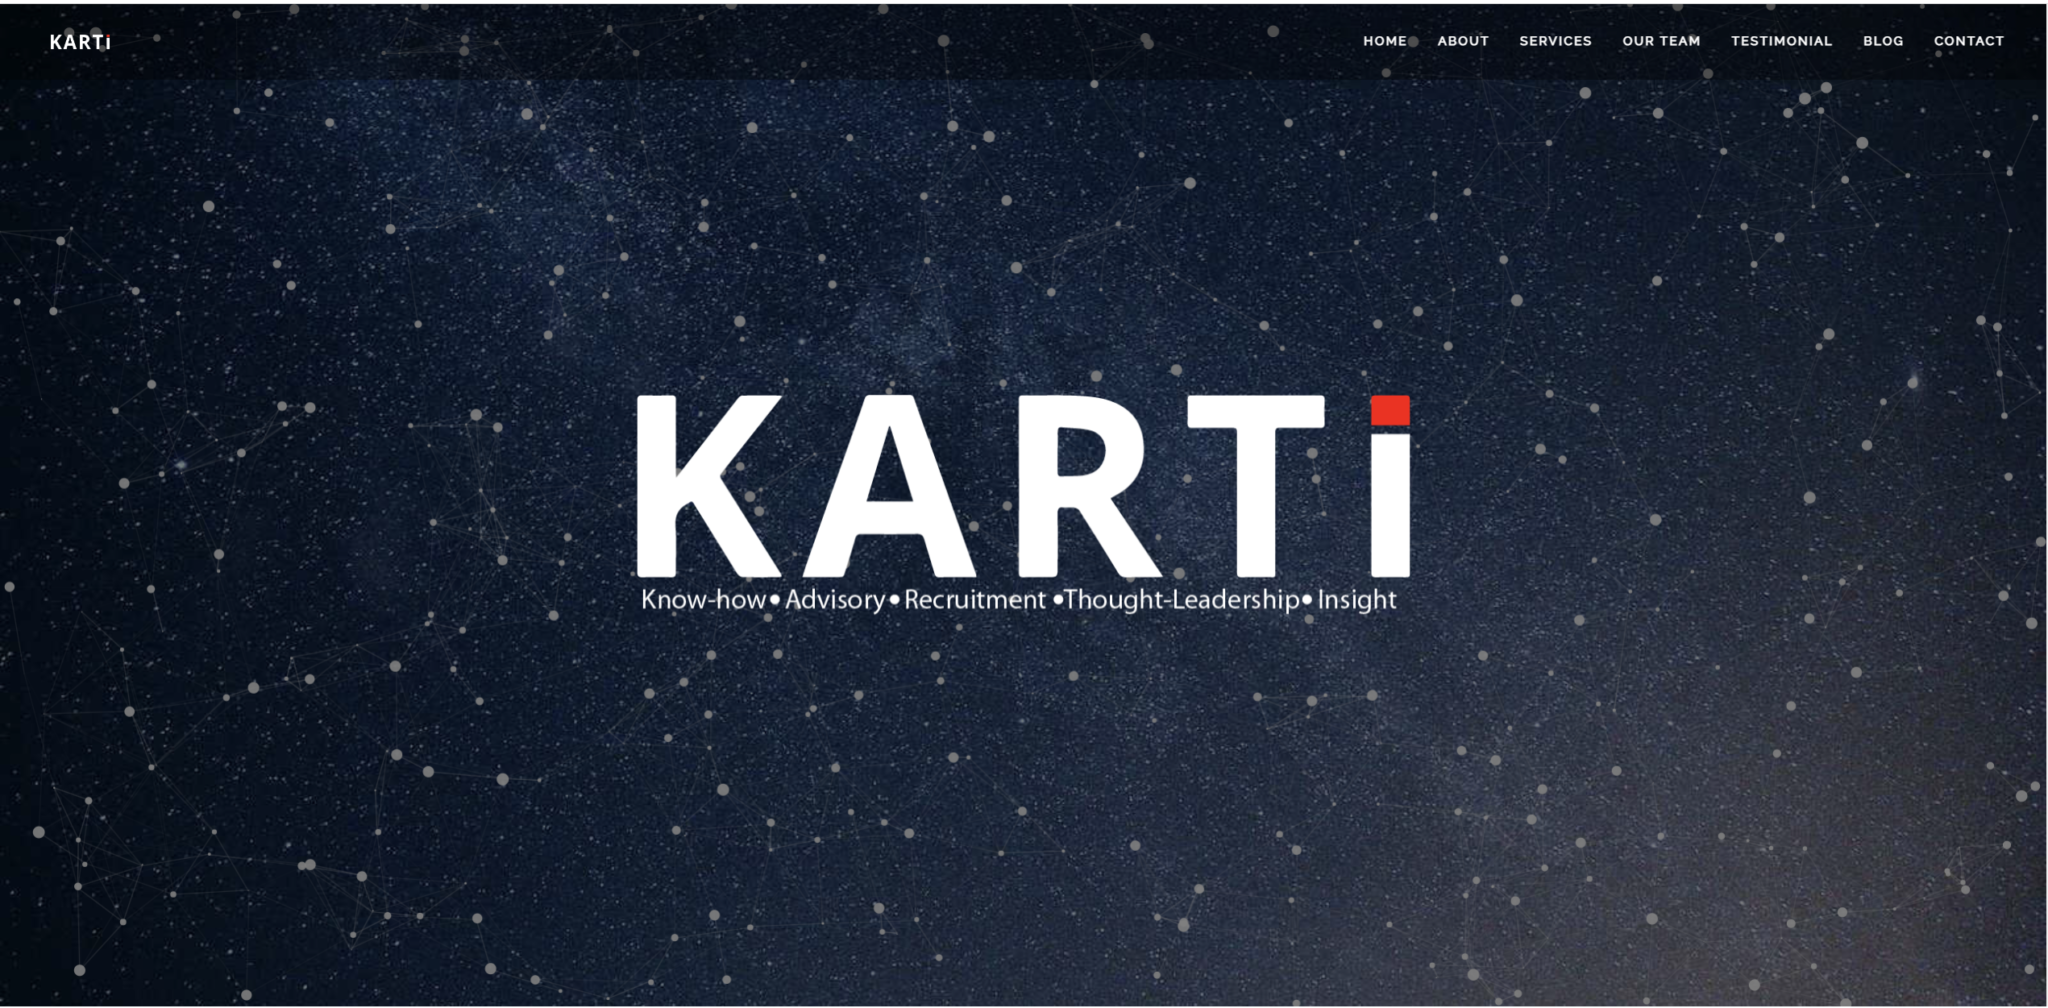 Karti is a synonymn for know how advisory recruitment thought leadership insight